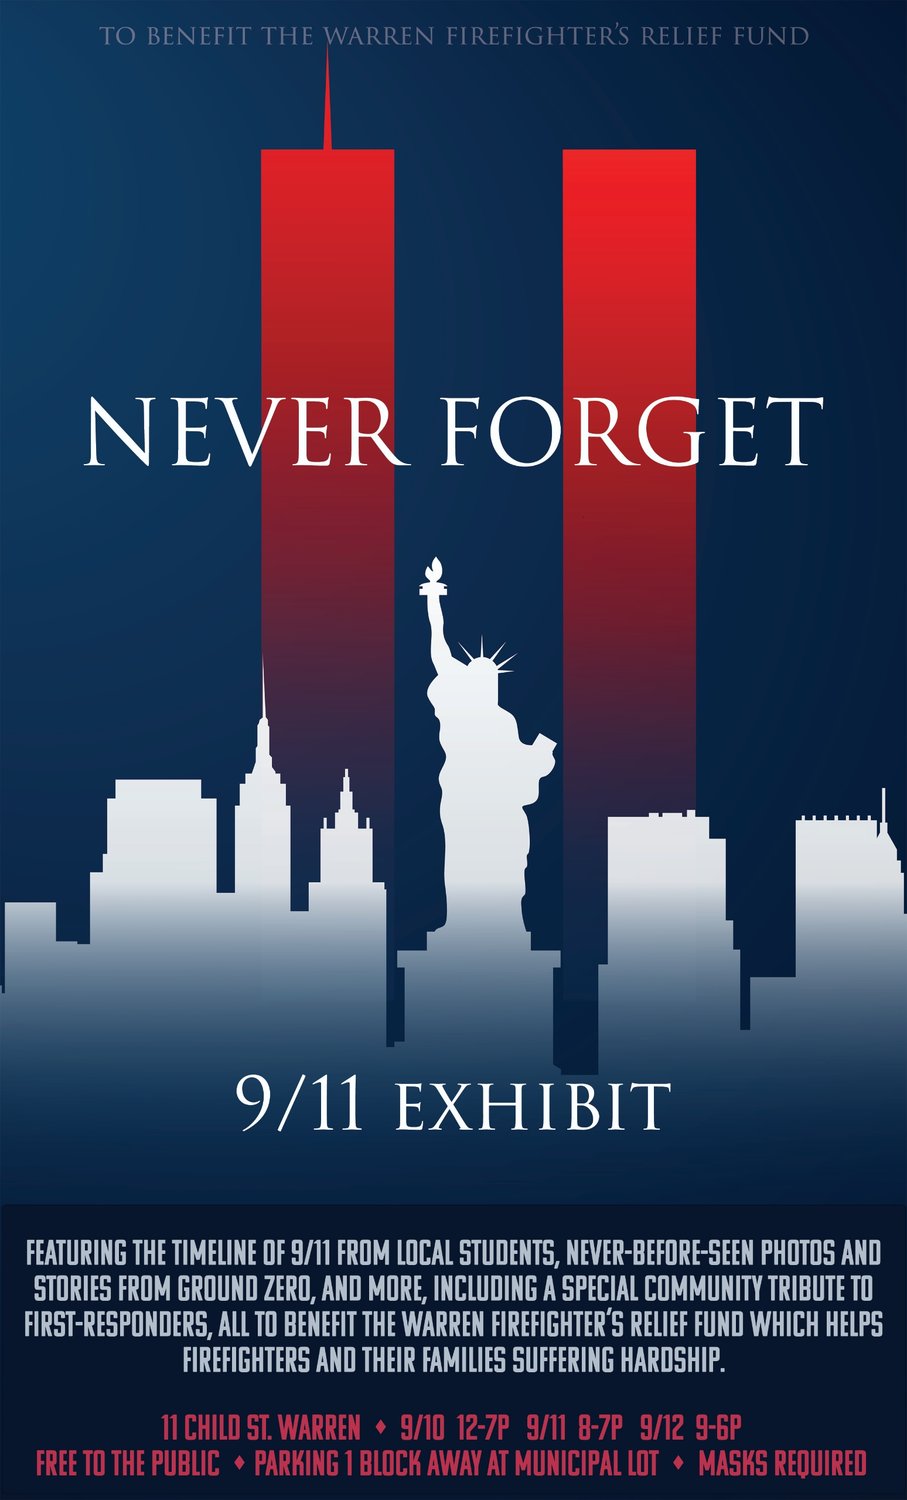 The commemorative 9/11 event will be held from Sept. 10-12 at 11 Child Street in Warren.